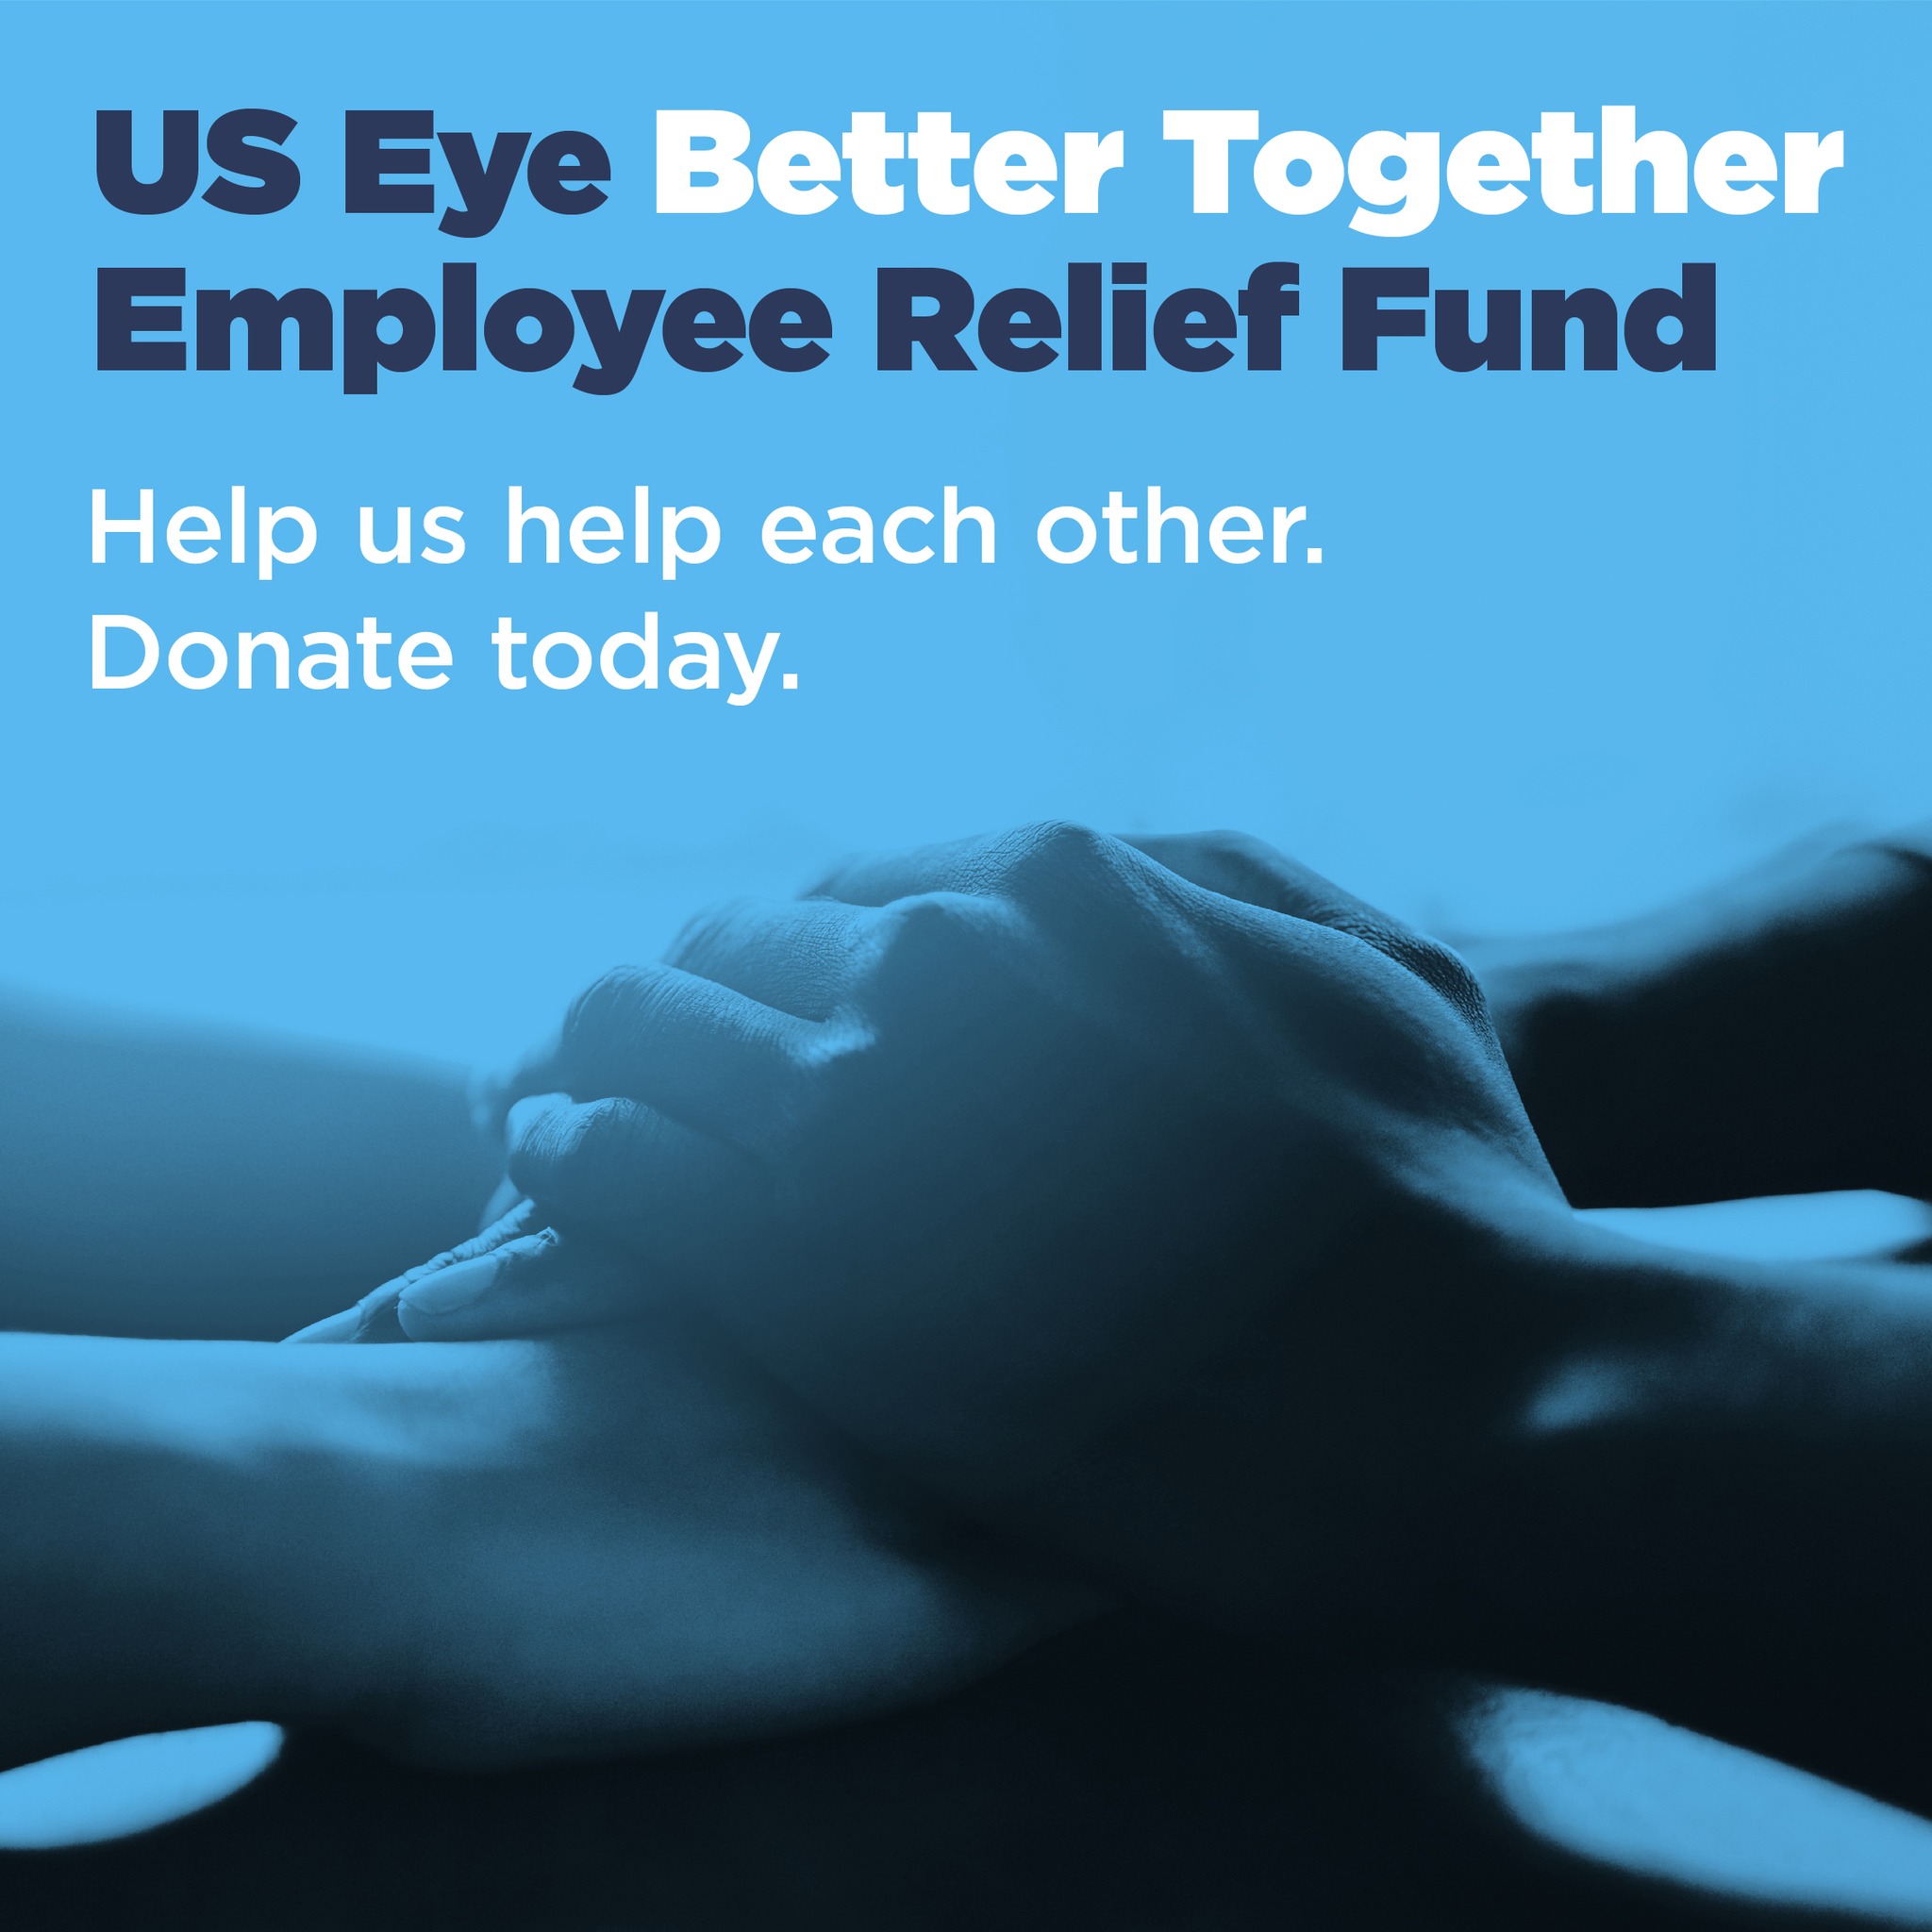 US Eye Better Together Employee Relief Fund